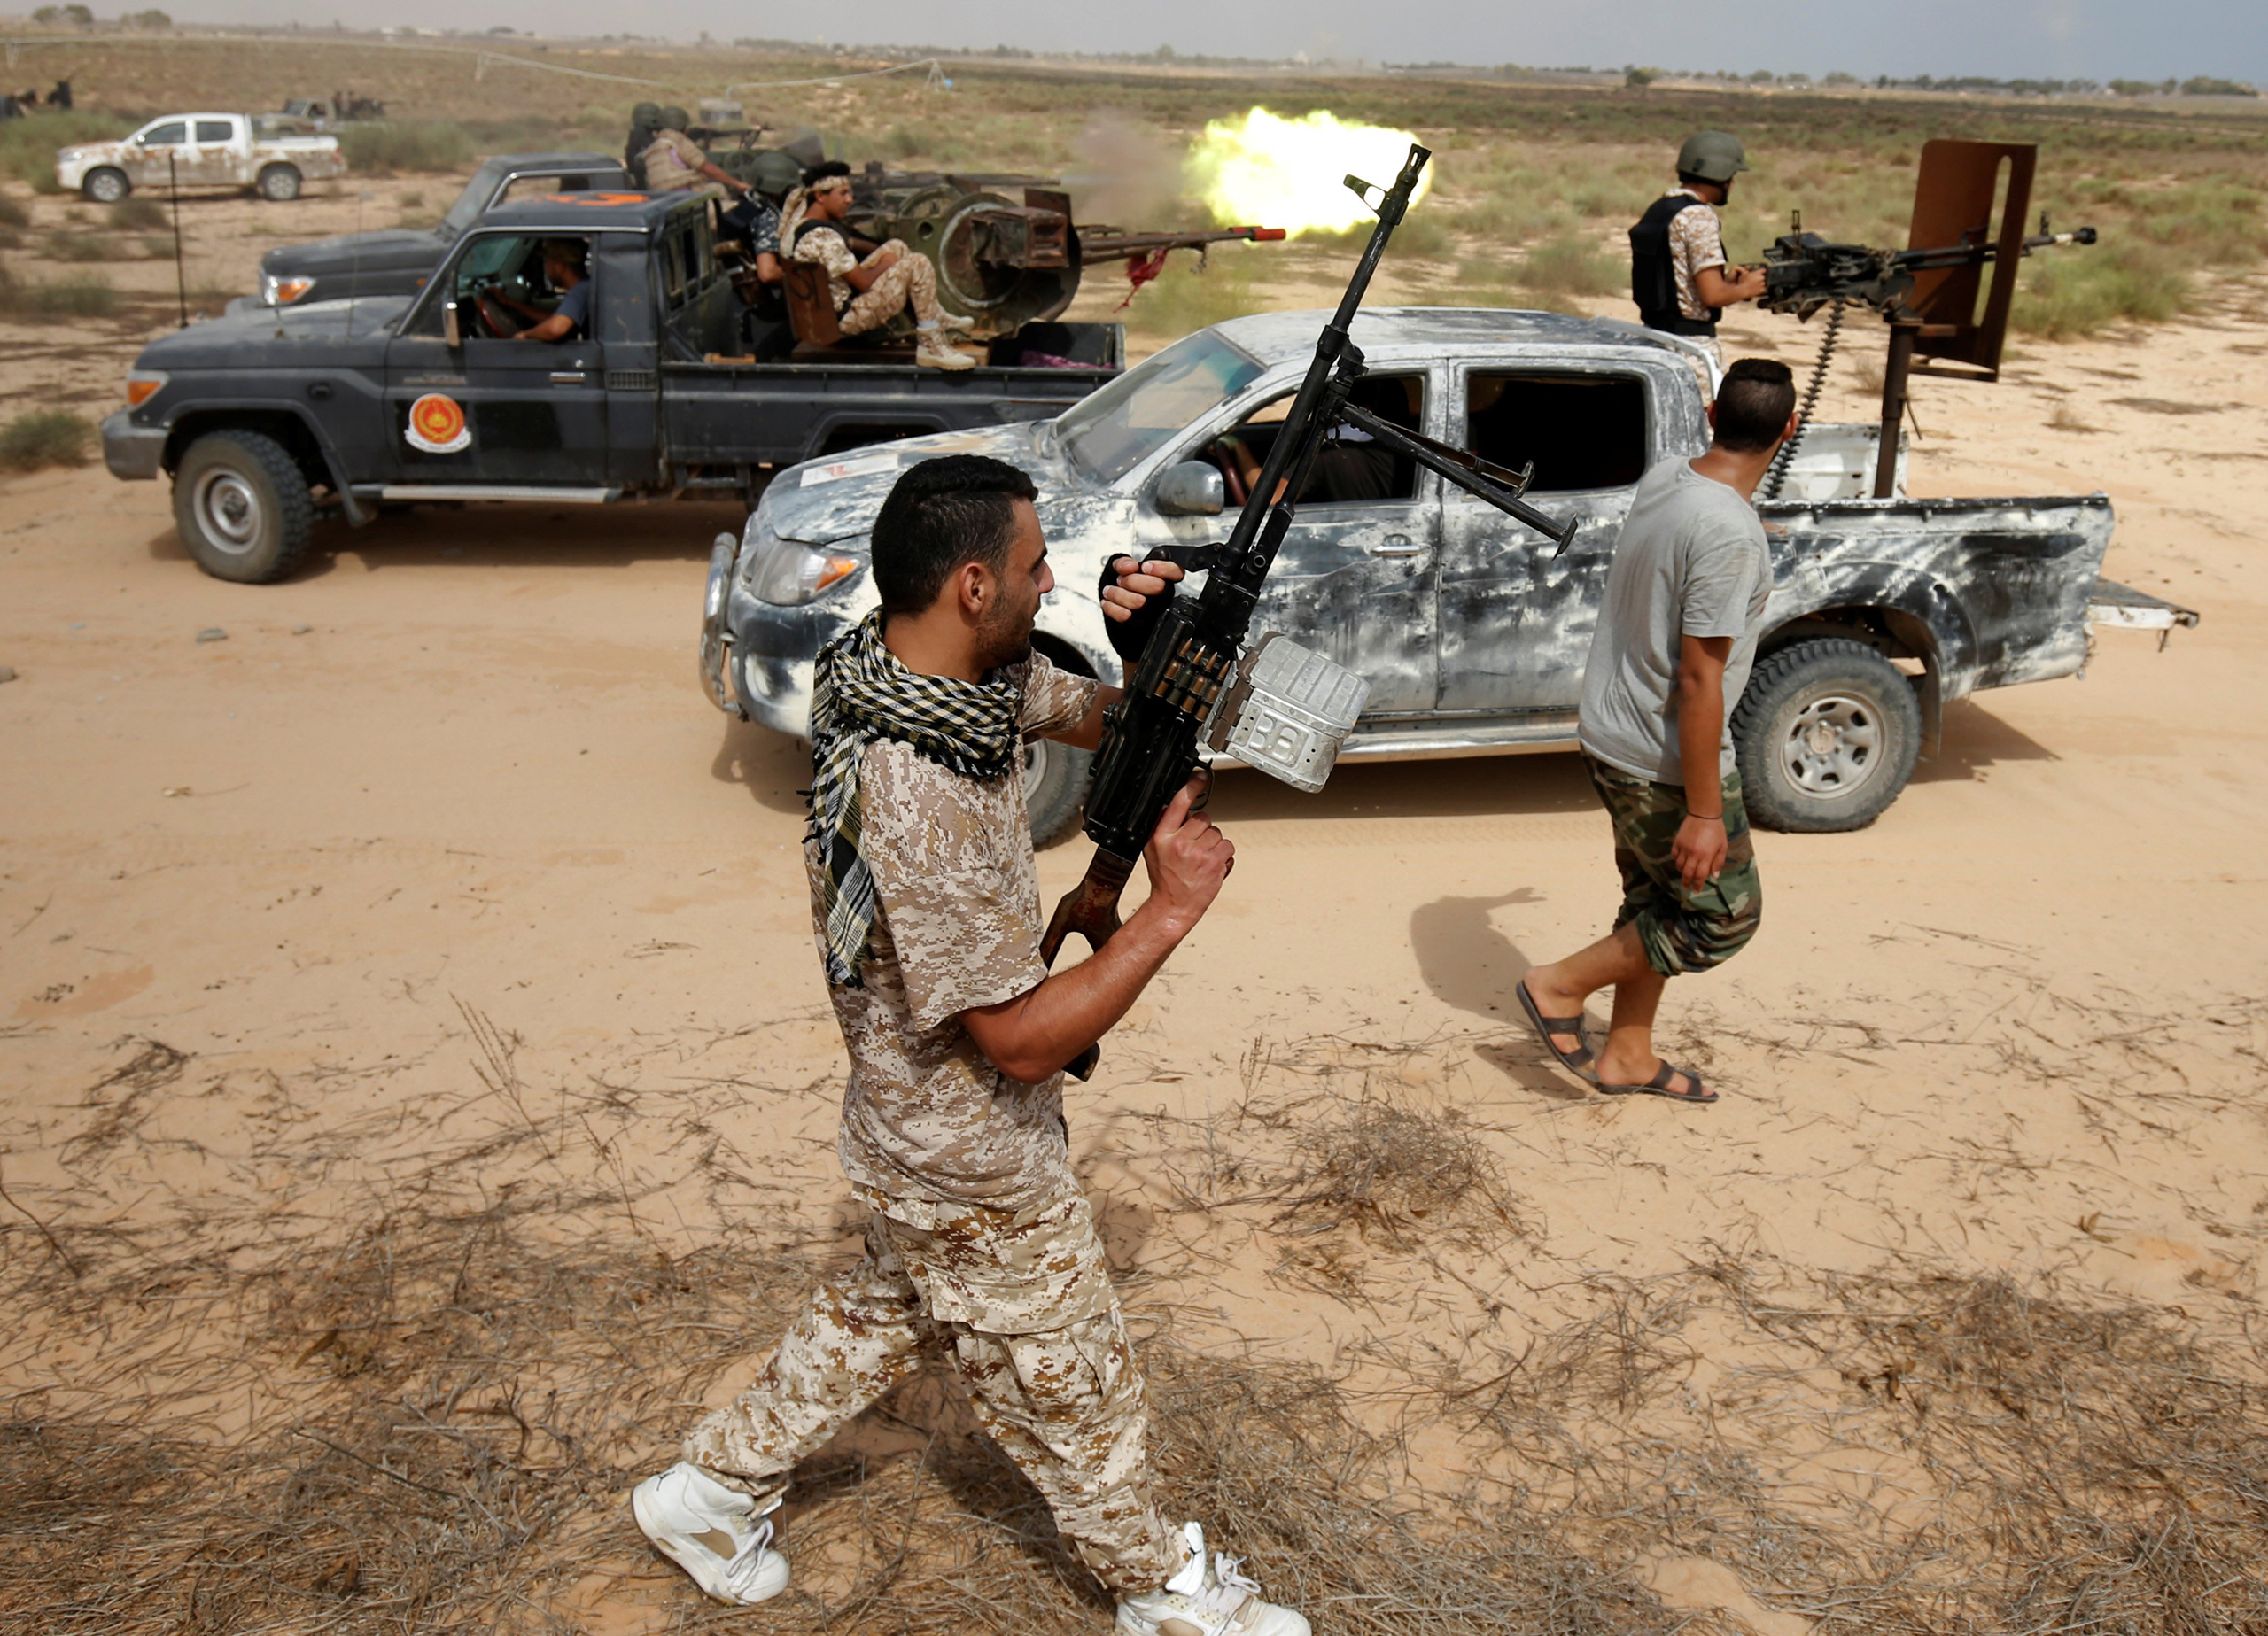 Libyan forces allied with the U.N.-backed unity government fire weapons as they move towards ISIS fighters' positions in Sirt, Libya, on July 15, 2016.